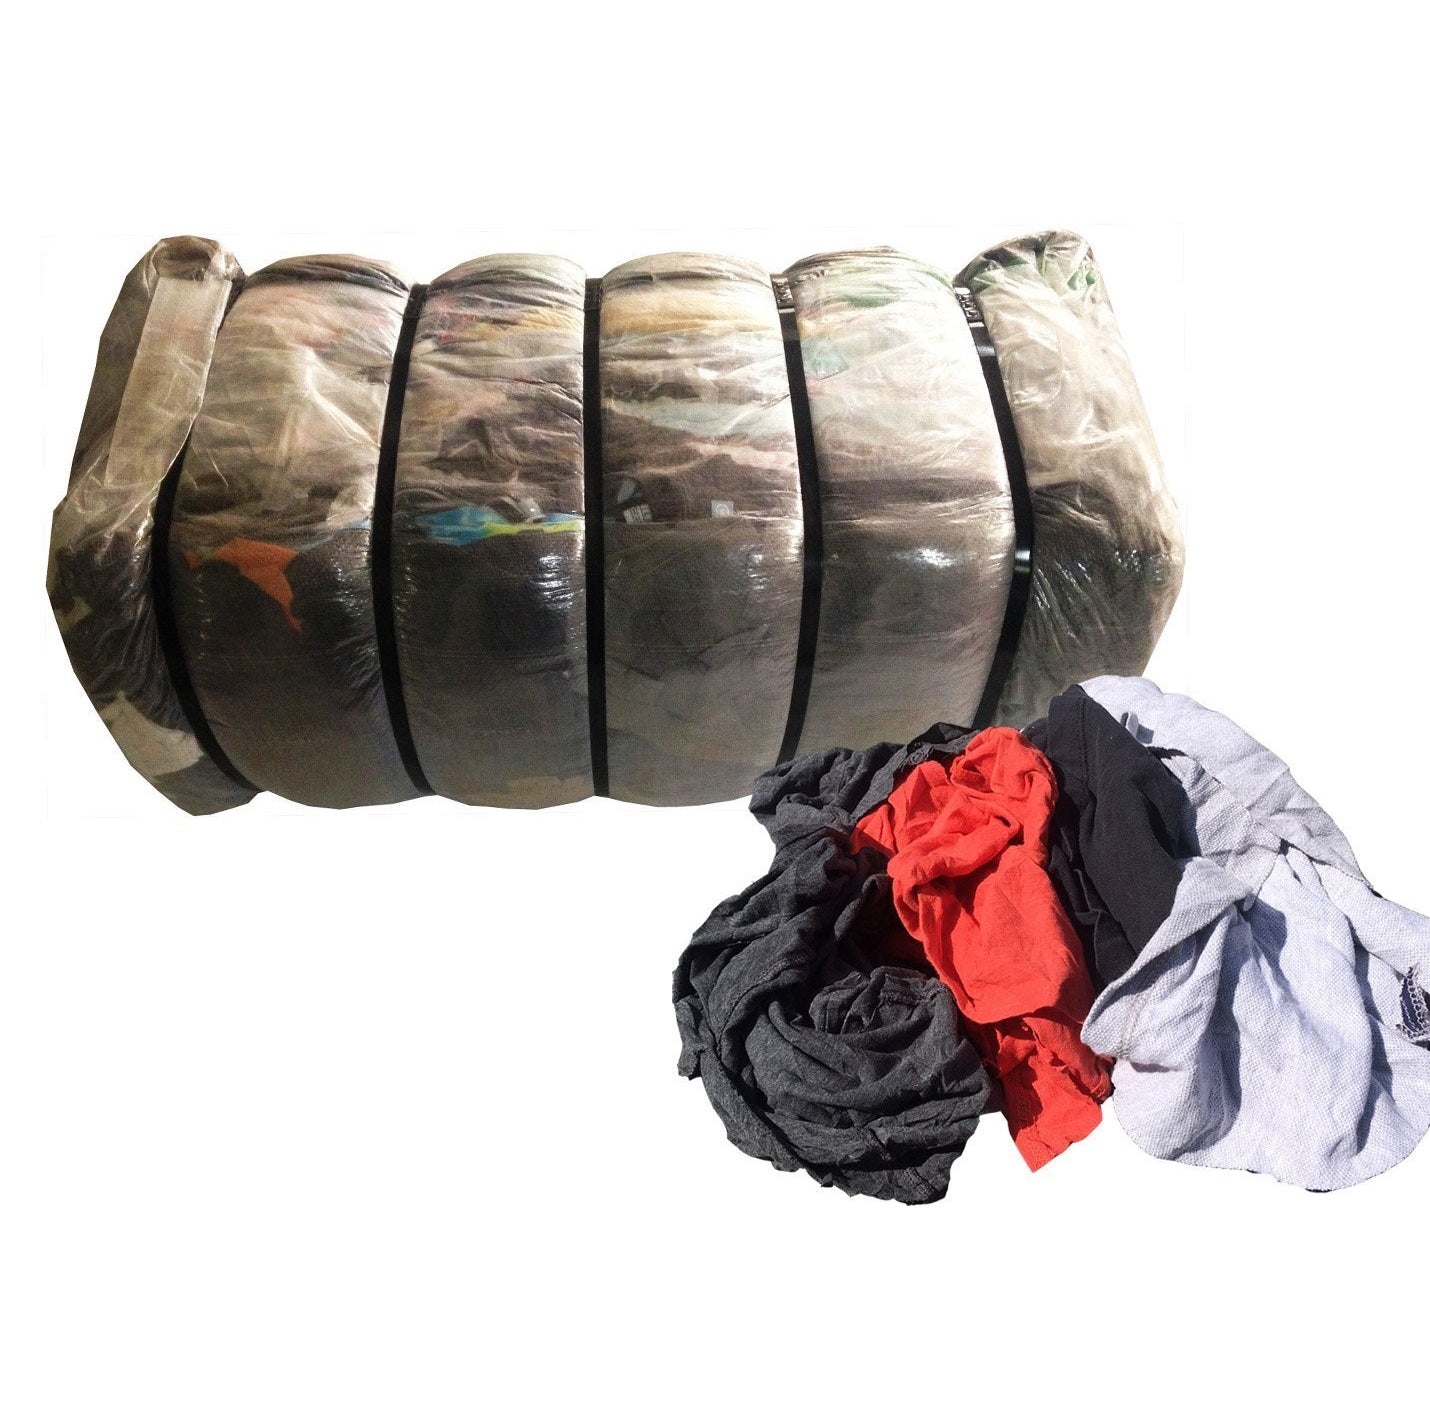 Wholesale 100 cotton rags For Reuse And Sustainable Fashion 